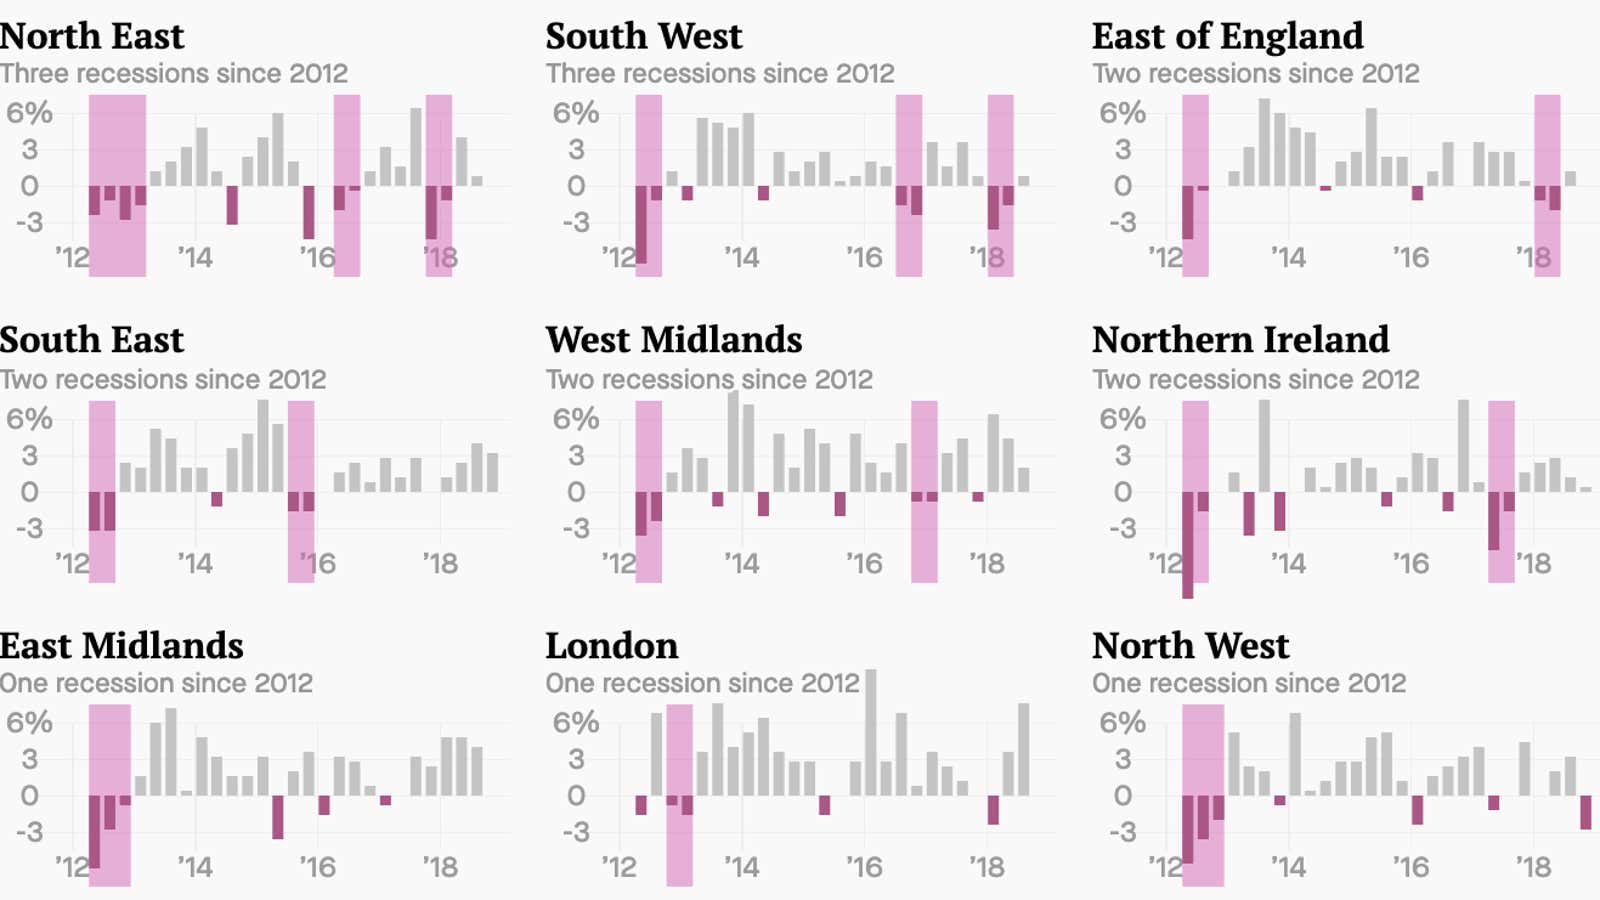 Which regions of the UK have had a recession recently?